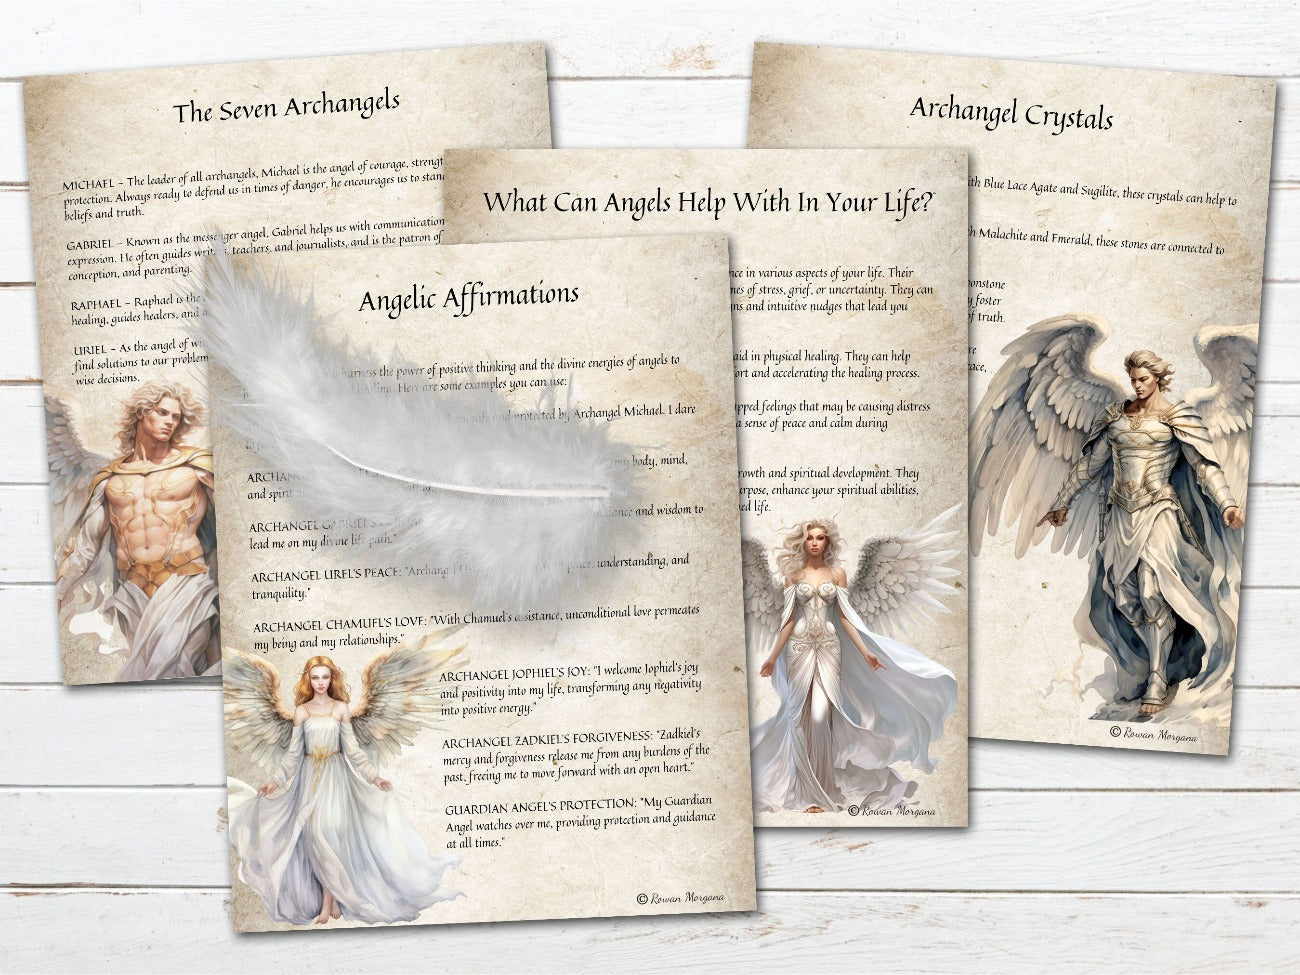 ANGEL GUIDANCE pages, Essential Guide to Divine Angelic Realm, The Seven Archangels, Angelic Affimations, What Can Angels Help With, Archangel Crystals - Morgana Magick Spell